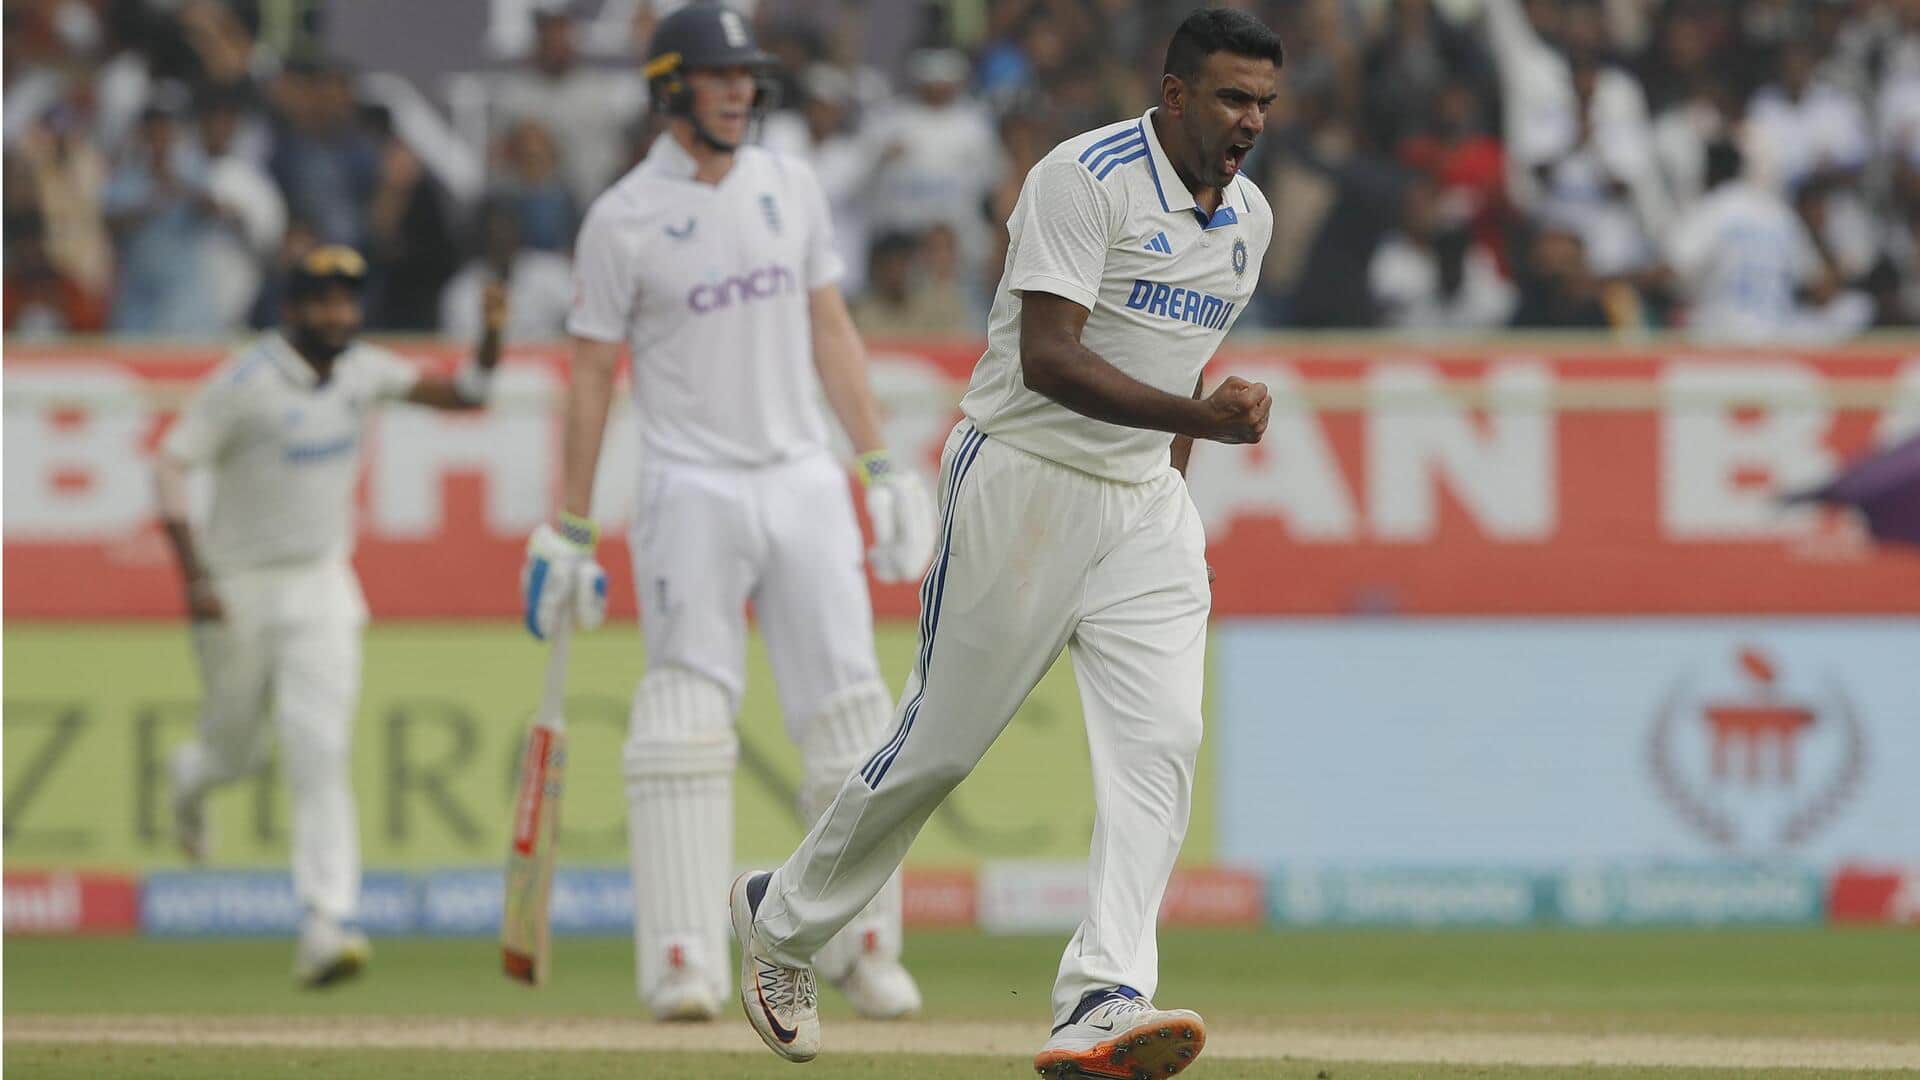 Ravichandran Ashwin becomes highest wicket-taker in India-England Tests among spinners